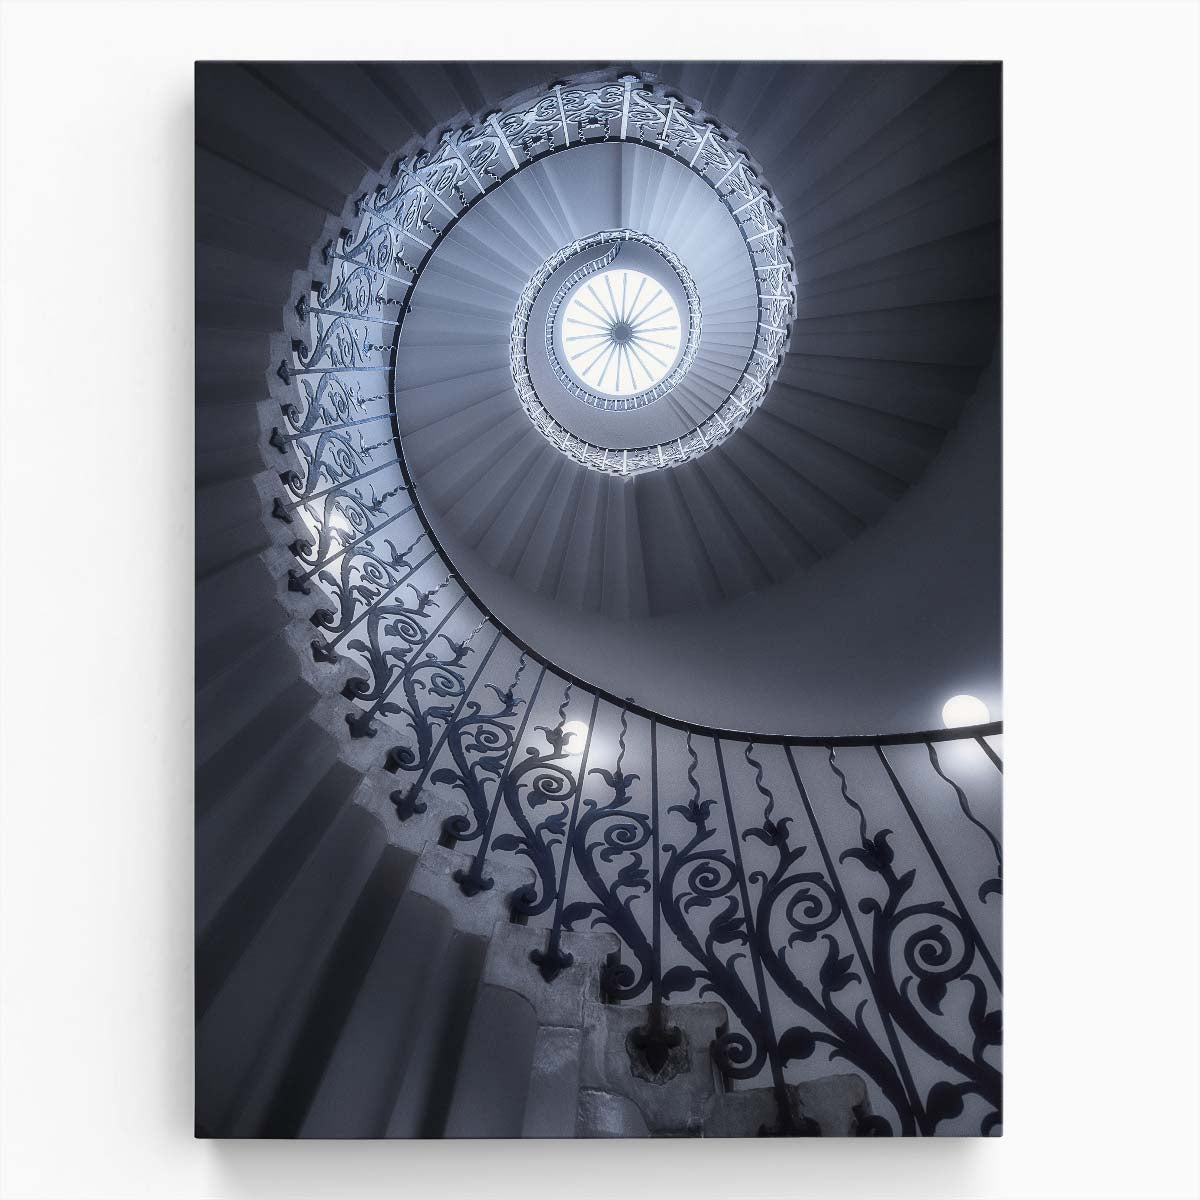 Blue-Toned Spiral Tulip Staircase Photography by Massimo Cuomo, UK by Luxuriance Designs, made in USA